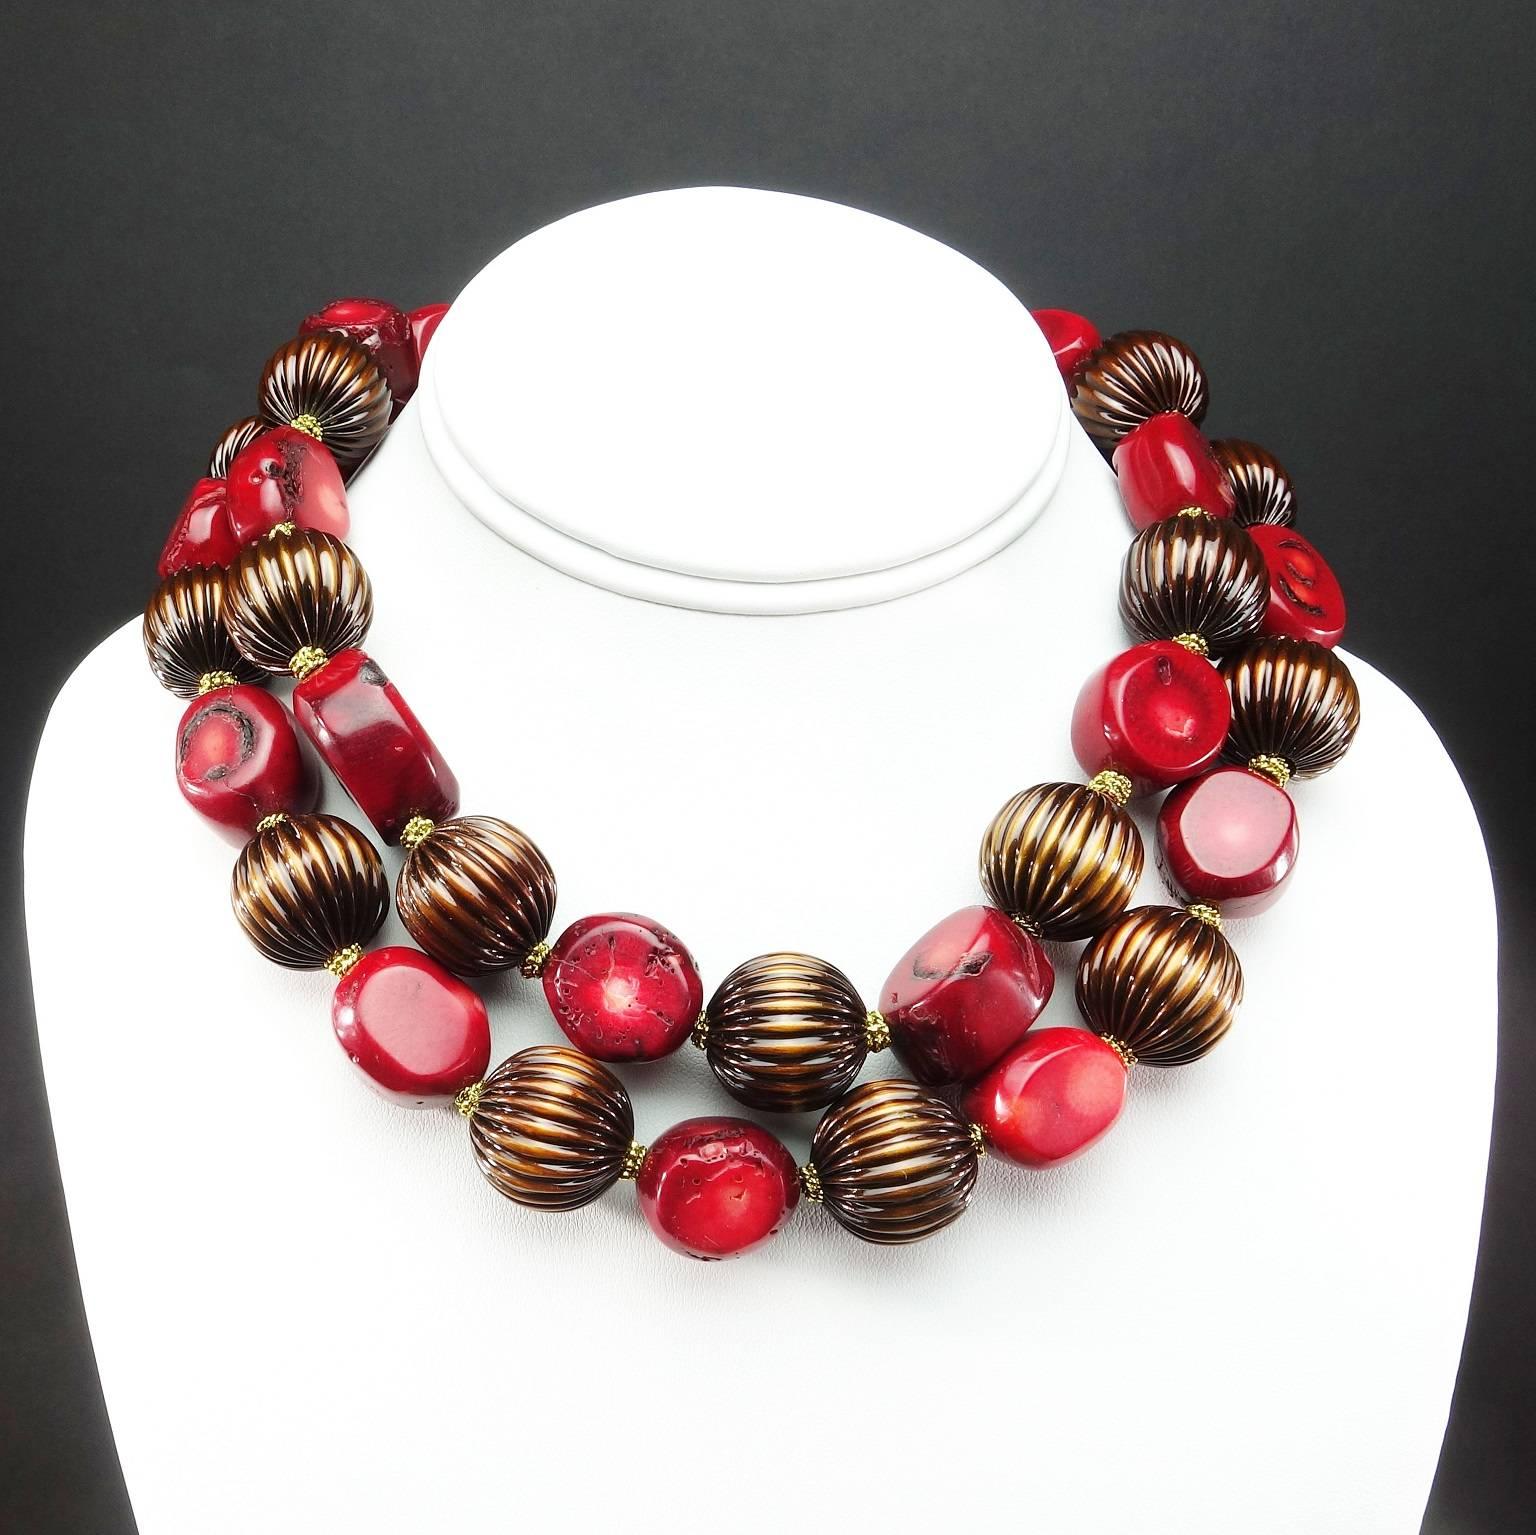 Artisan AJD 17 Inch Double Strand Deep Red Coral and Bronze Bead Choker Necklace